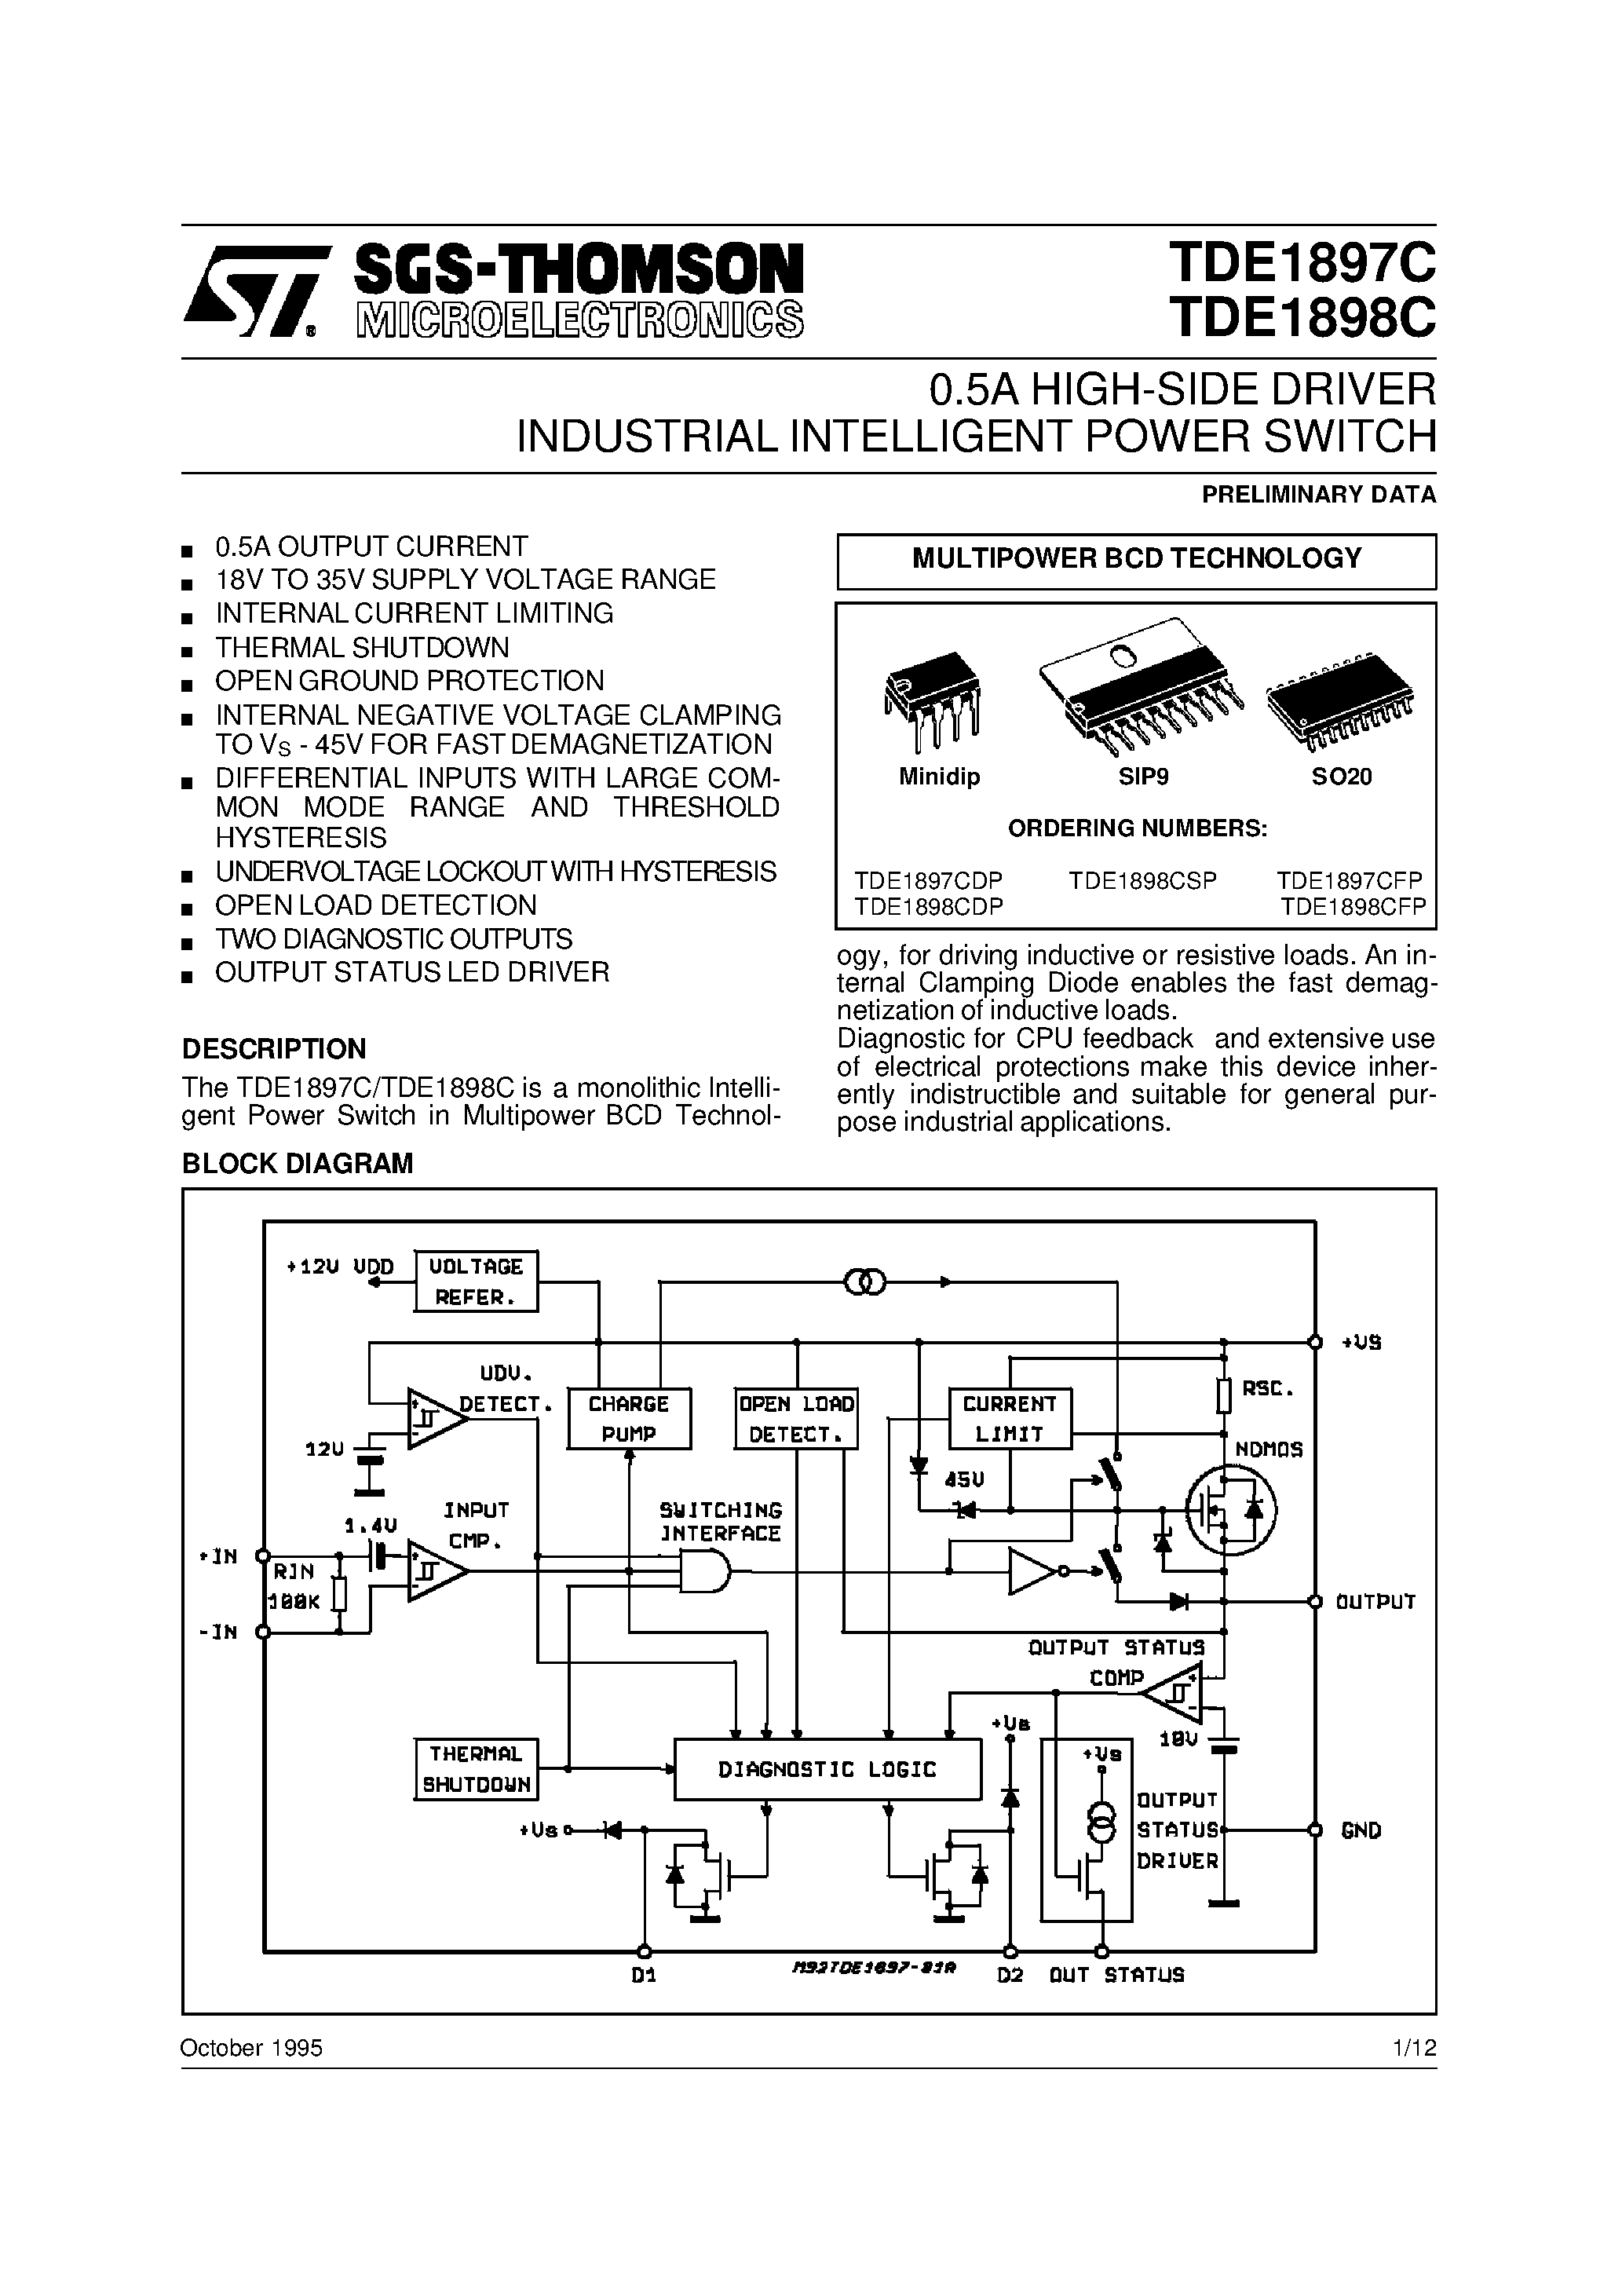 Datasheet TDE1898CDP - 0.5A HIGH-SIDE DRIVER INDUSTRIAL INTELLIGENT POWER SWITCH page 1